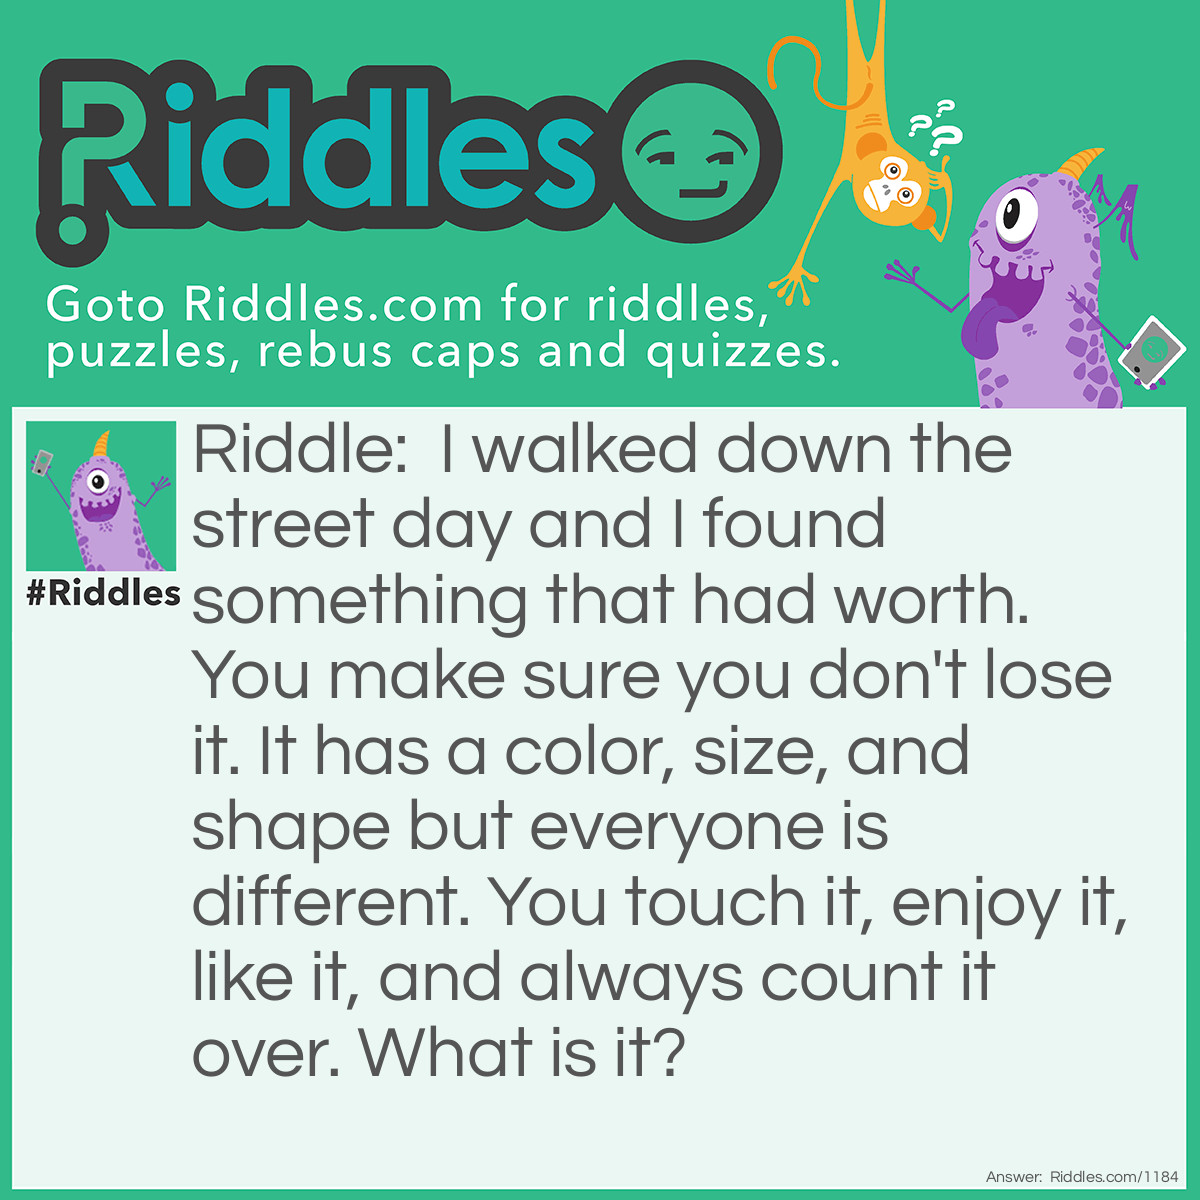 Riddle: I walked down the street day and I found something that had worth. You make sure you don't lose it. It has a color, size, and shape but everyone is different. You touch it, enjoy it, like it, and always count it over. What is it? Answer: Money.